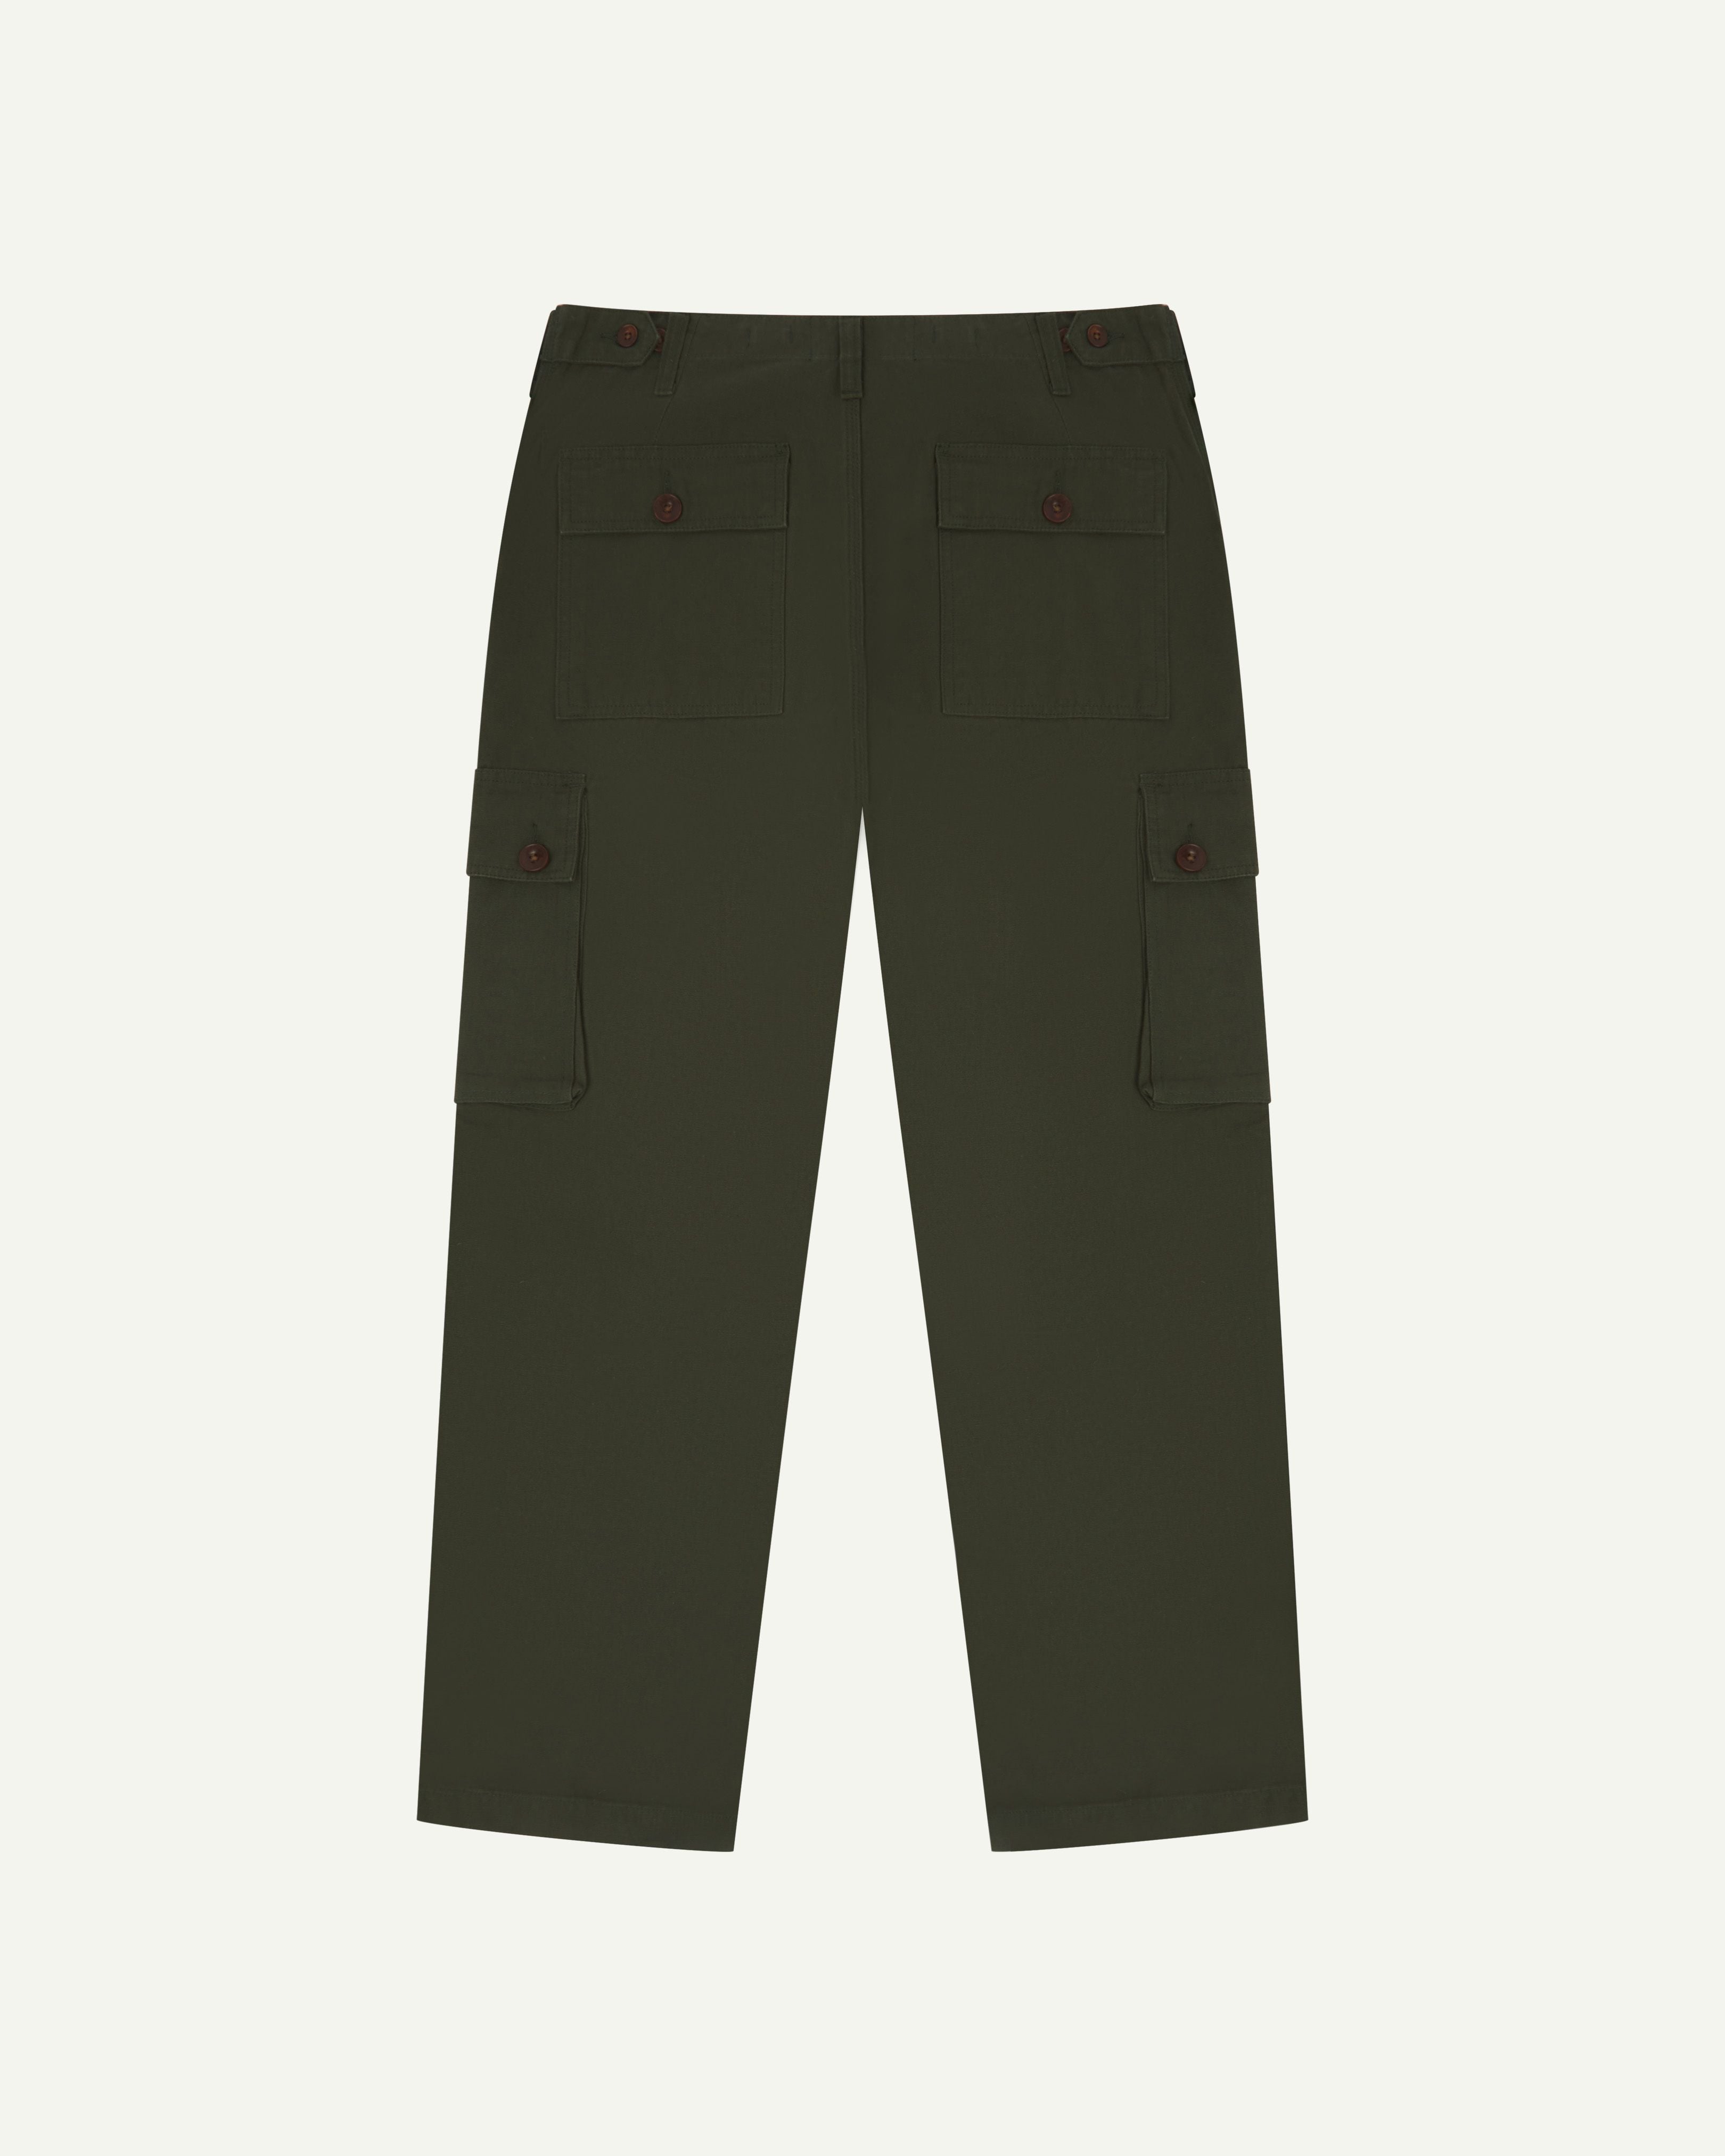 Flat back view of #5014 Uskees men's organic cotton 'vine green' cargo trousers showing back and side pockets..